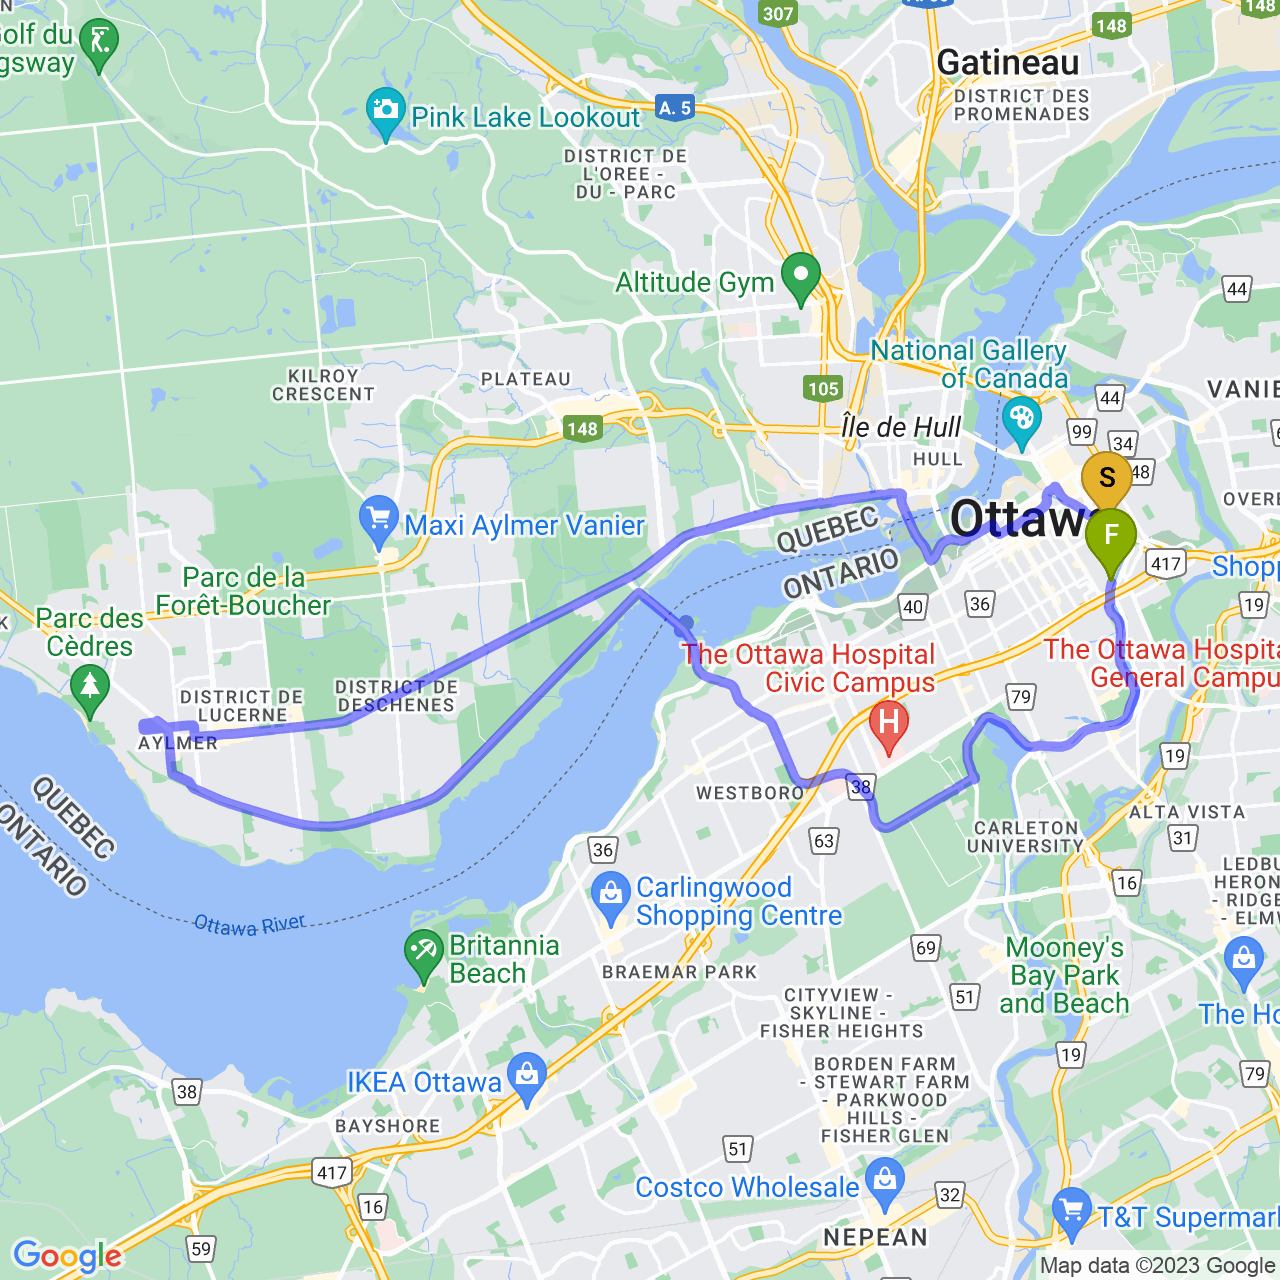 map of when the sun shines you visit Aylmer